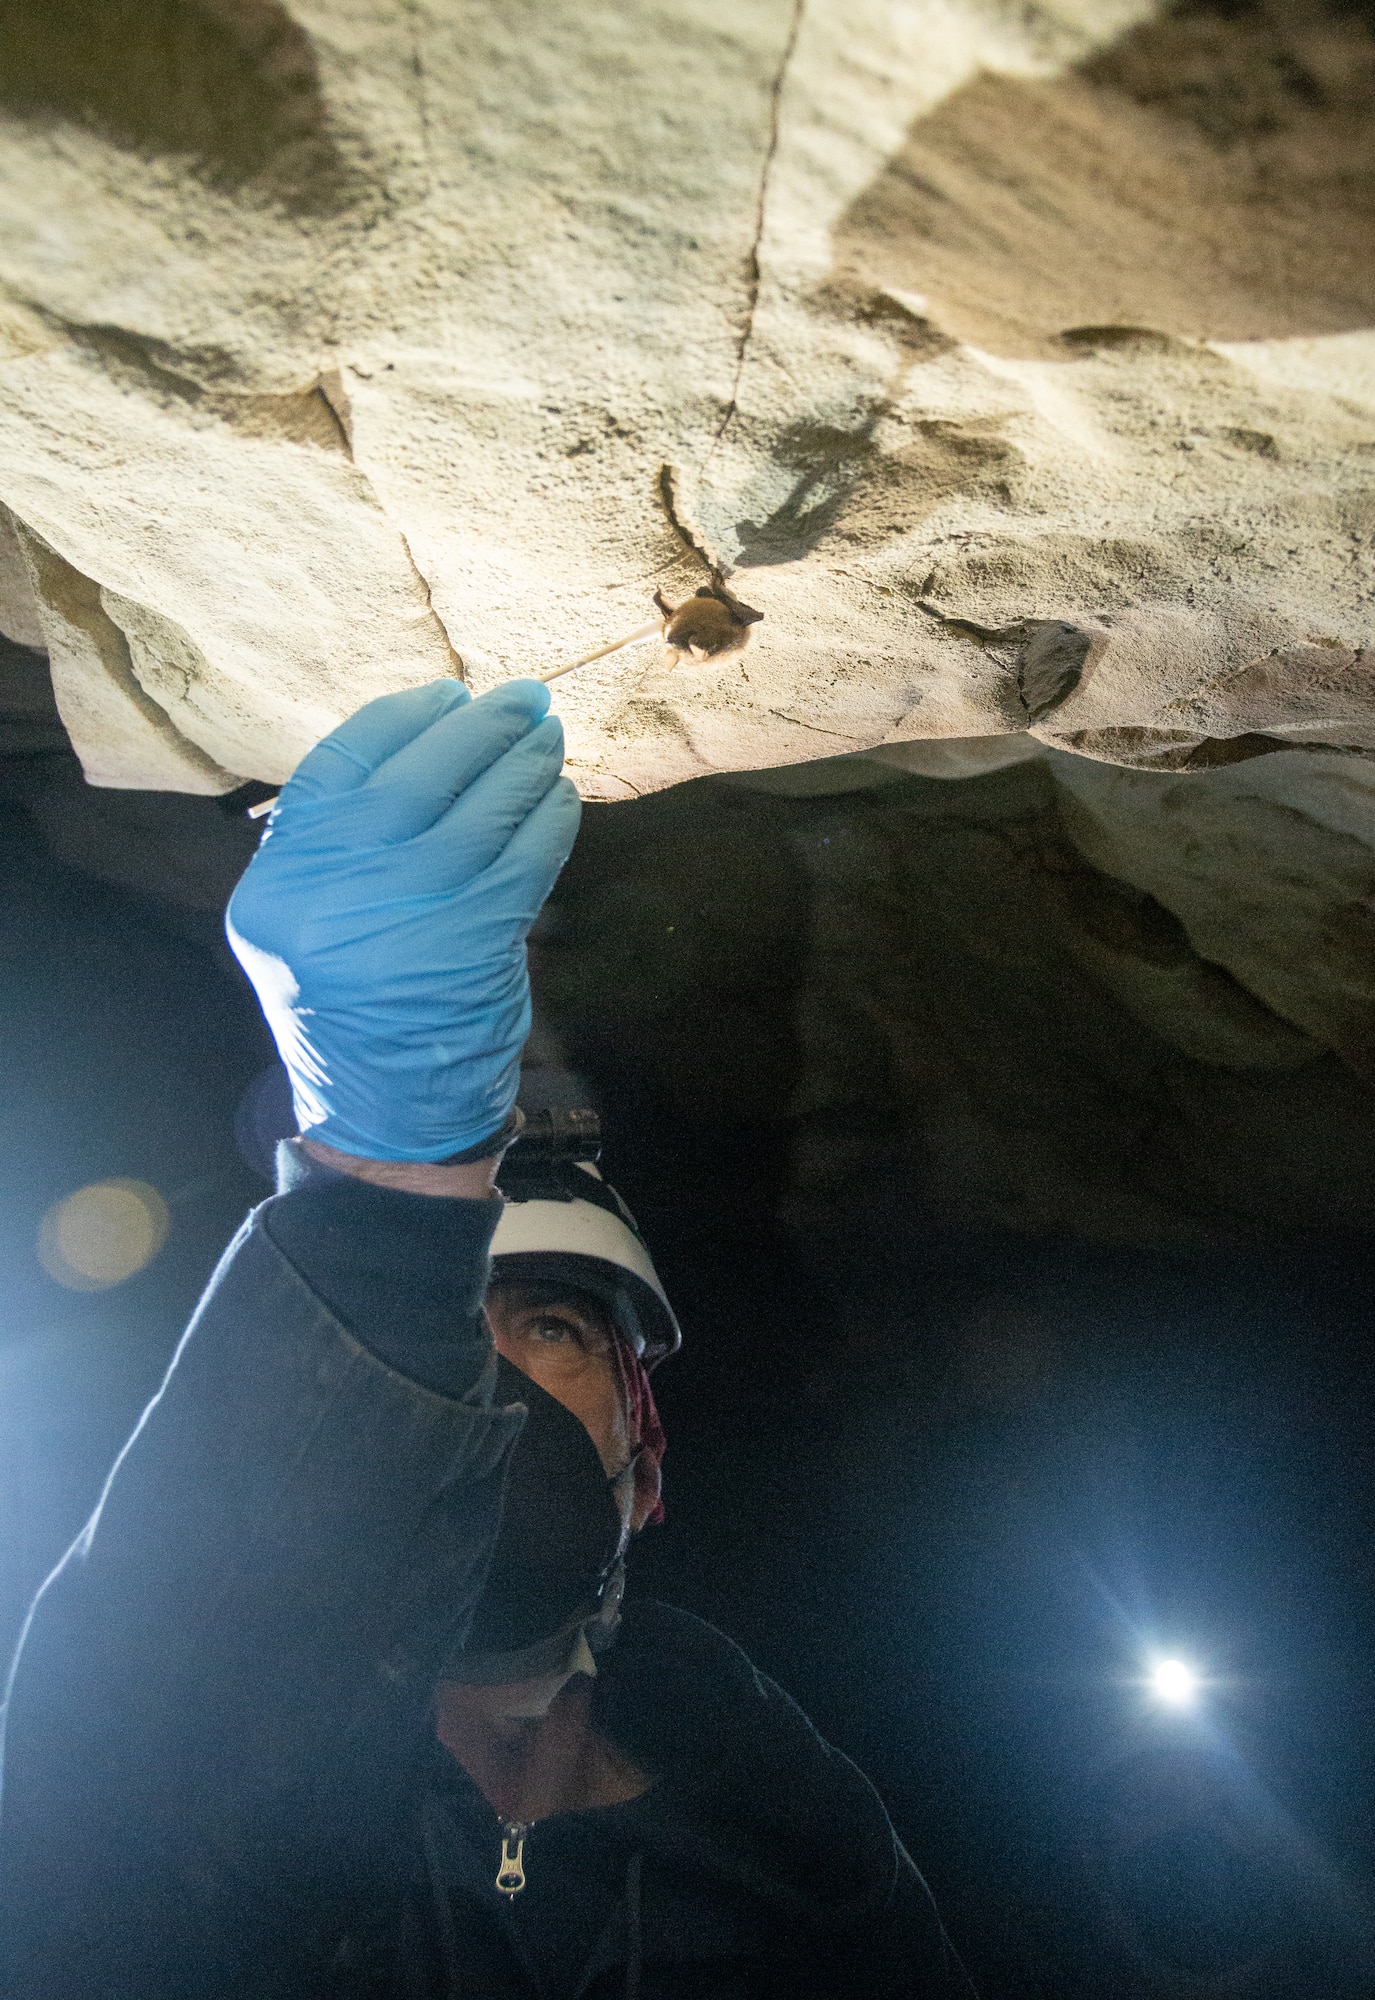 Biologist doing research in a cave